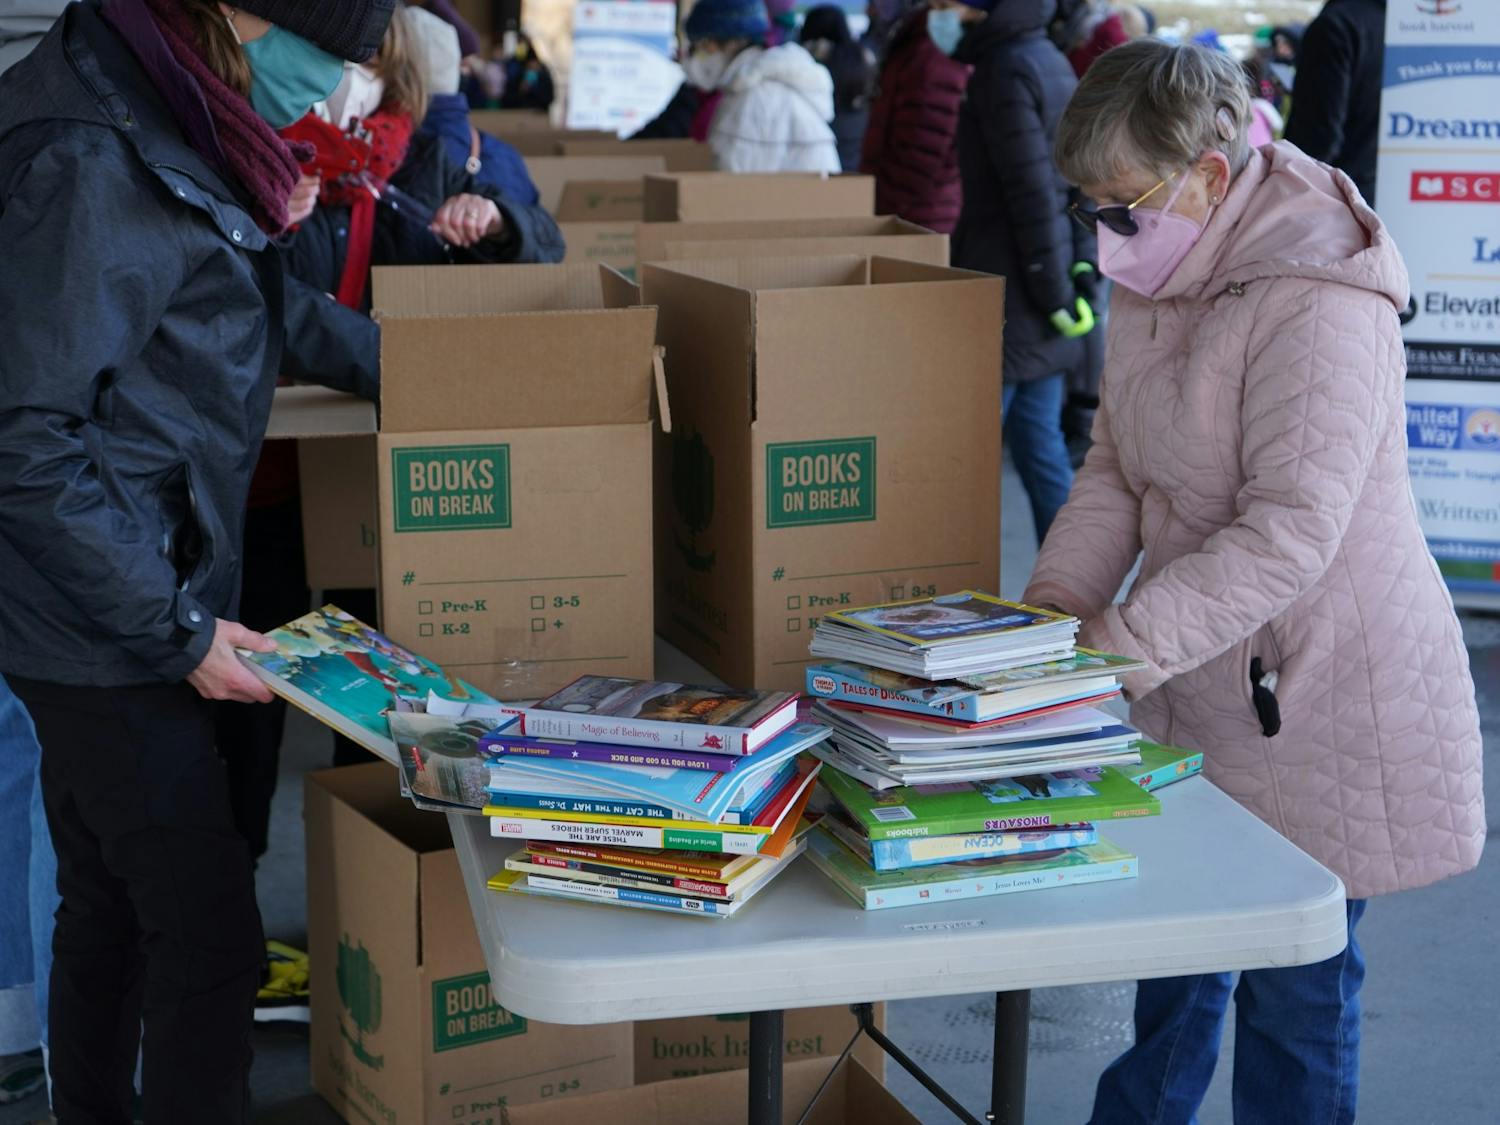 Volunteers count books at the Dream Big Book Drive in Durham on Jan. 17, 2022. Photo courtesy of Benay Hicks.